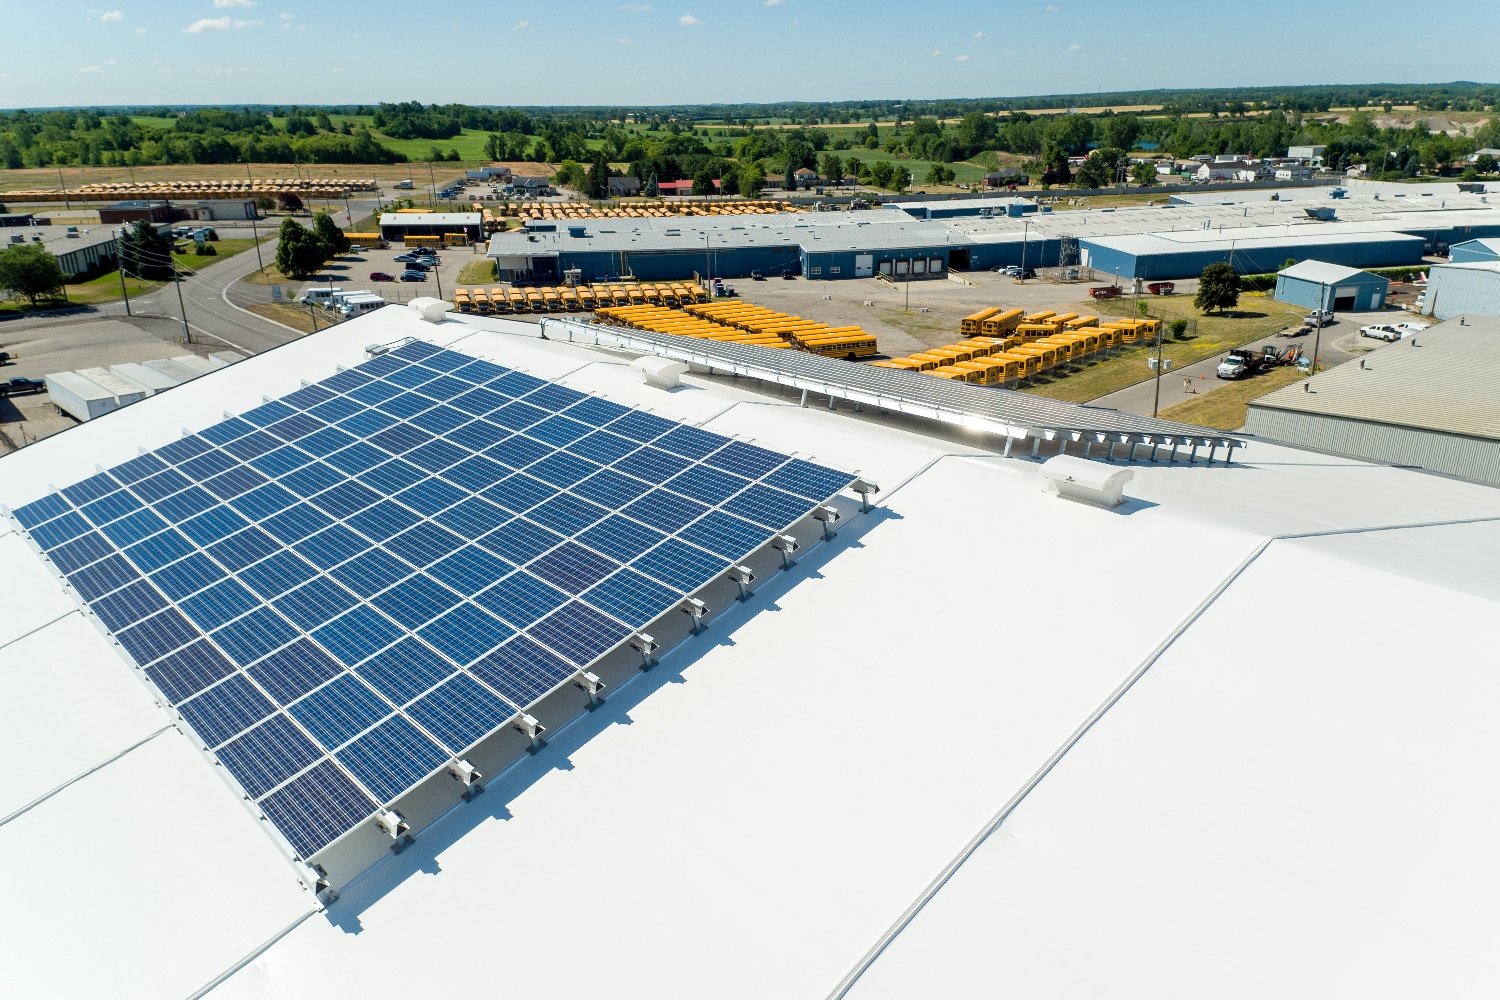 Putting Solar Panels on Tension Fabric Buildings